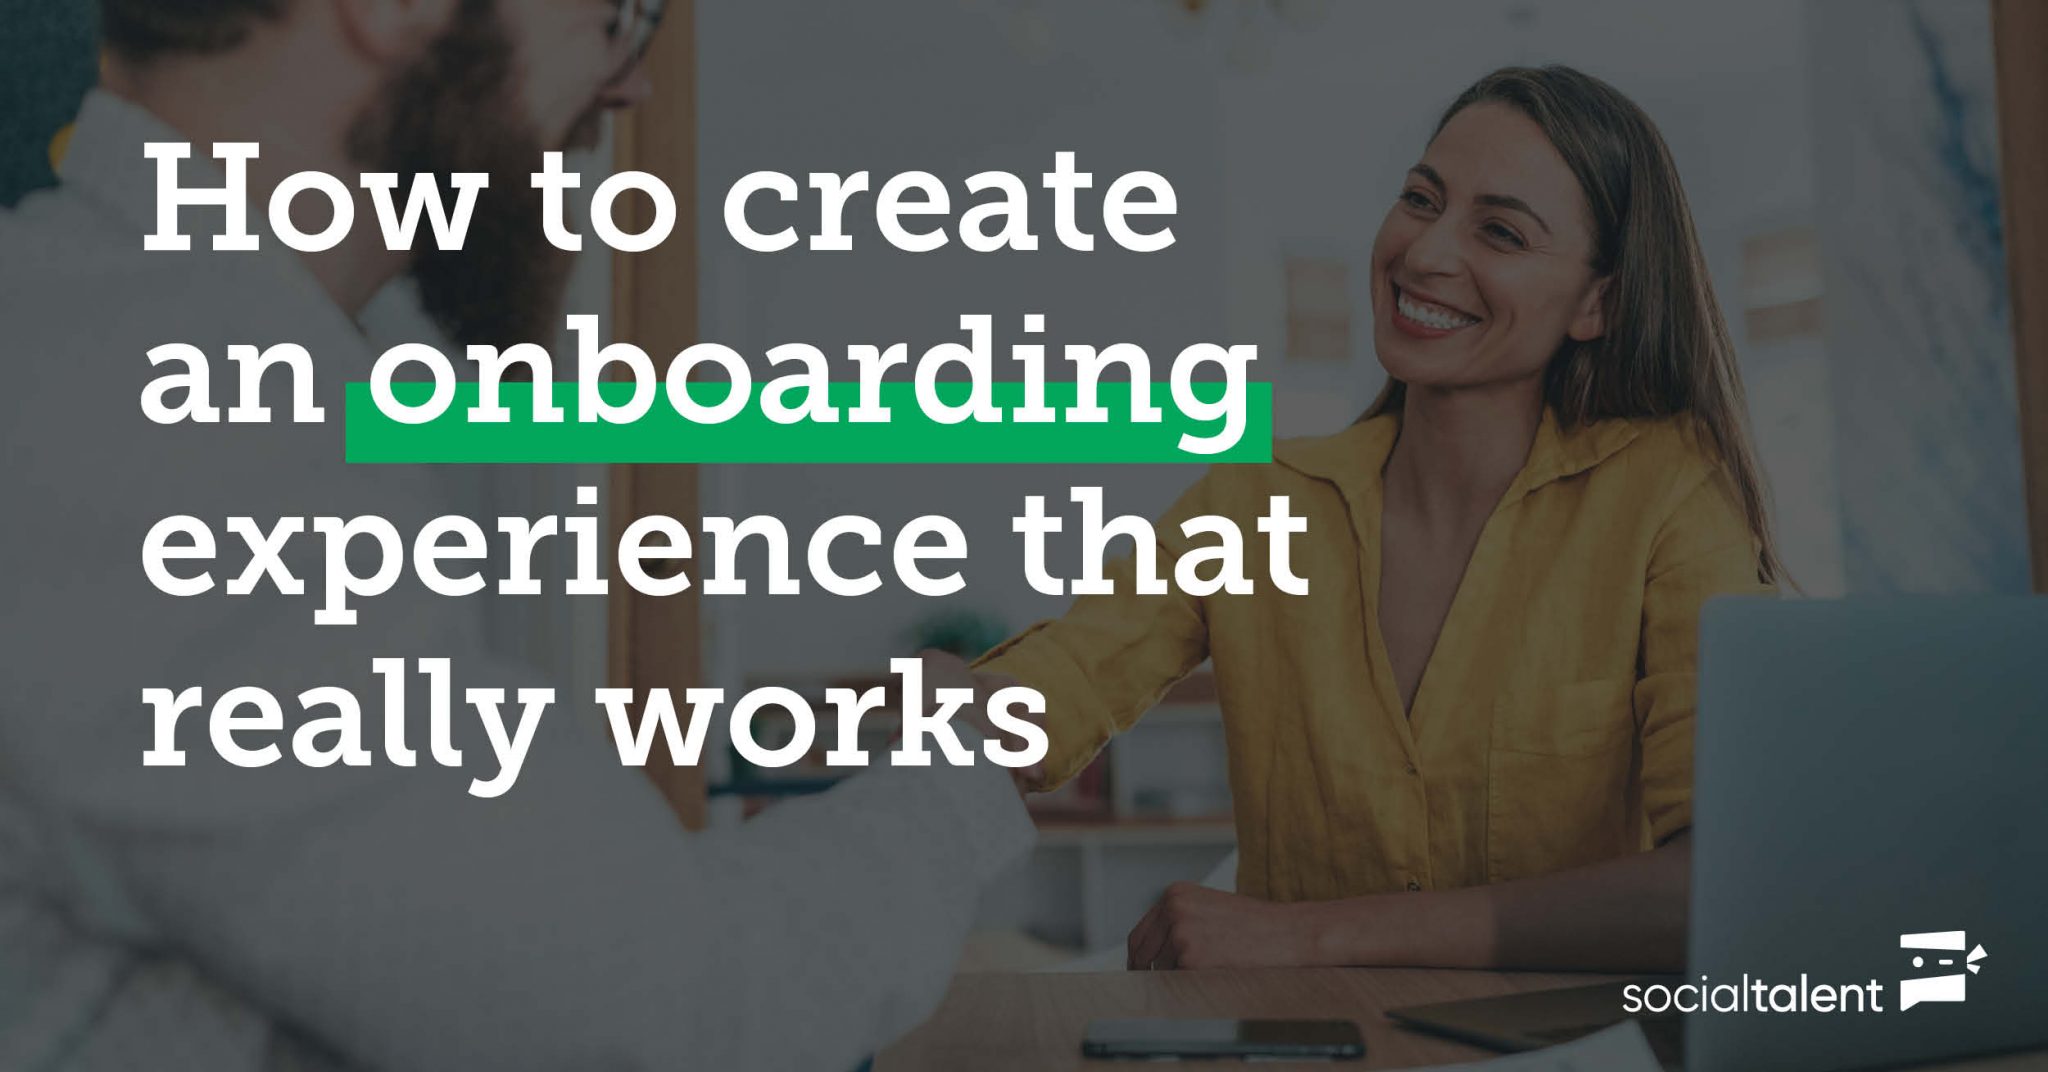 How to create an onboarding experience that really works